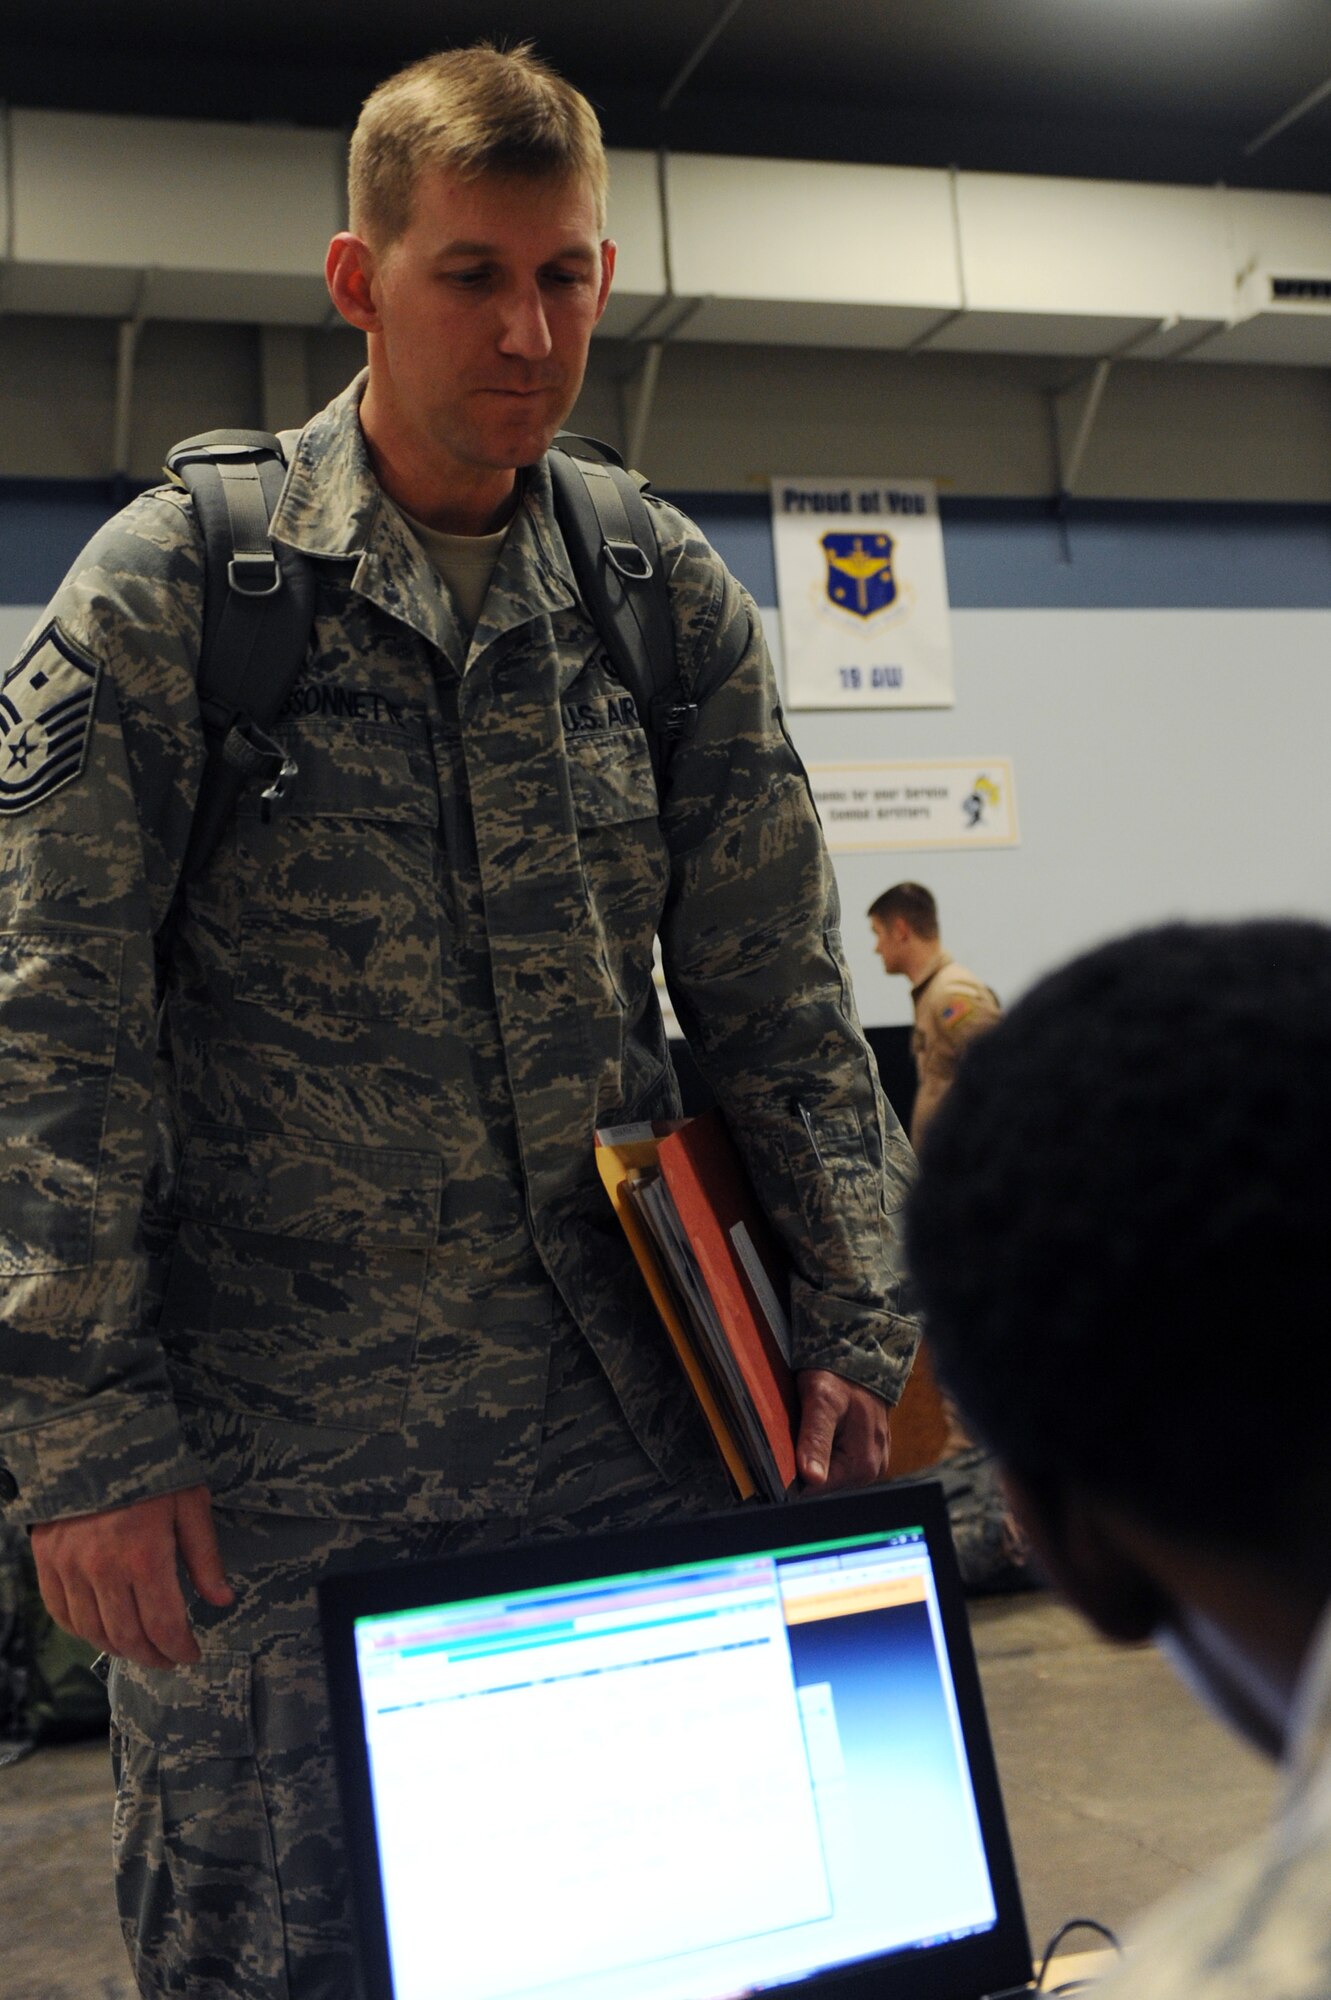 Master Sgt. Bryan Bissonette, 19th Communications Squadron first sergeant, processes in line prior to deployingJan. 10, 2012, at Little Rock Air Force Base, Ark. Bissonette deployed with nearly 200 other Airmen to support combat operations in Southwest Asia. (U.S. Air Force Photo by Airman 1st Class Rusty Frank)